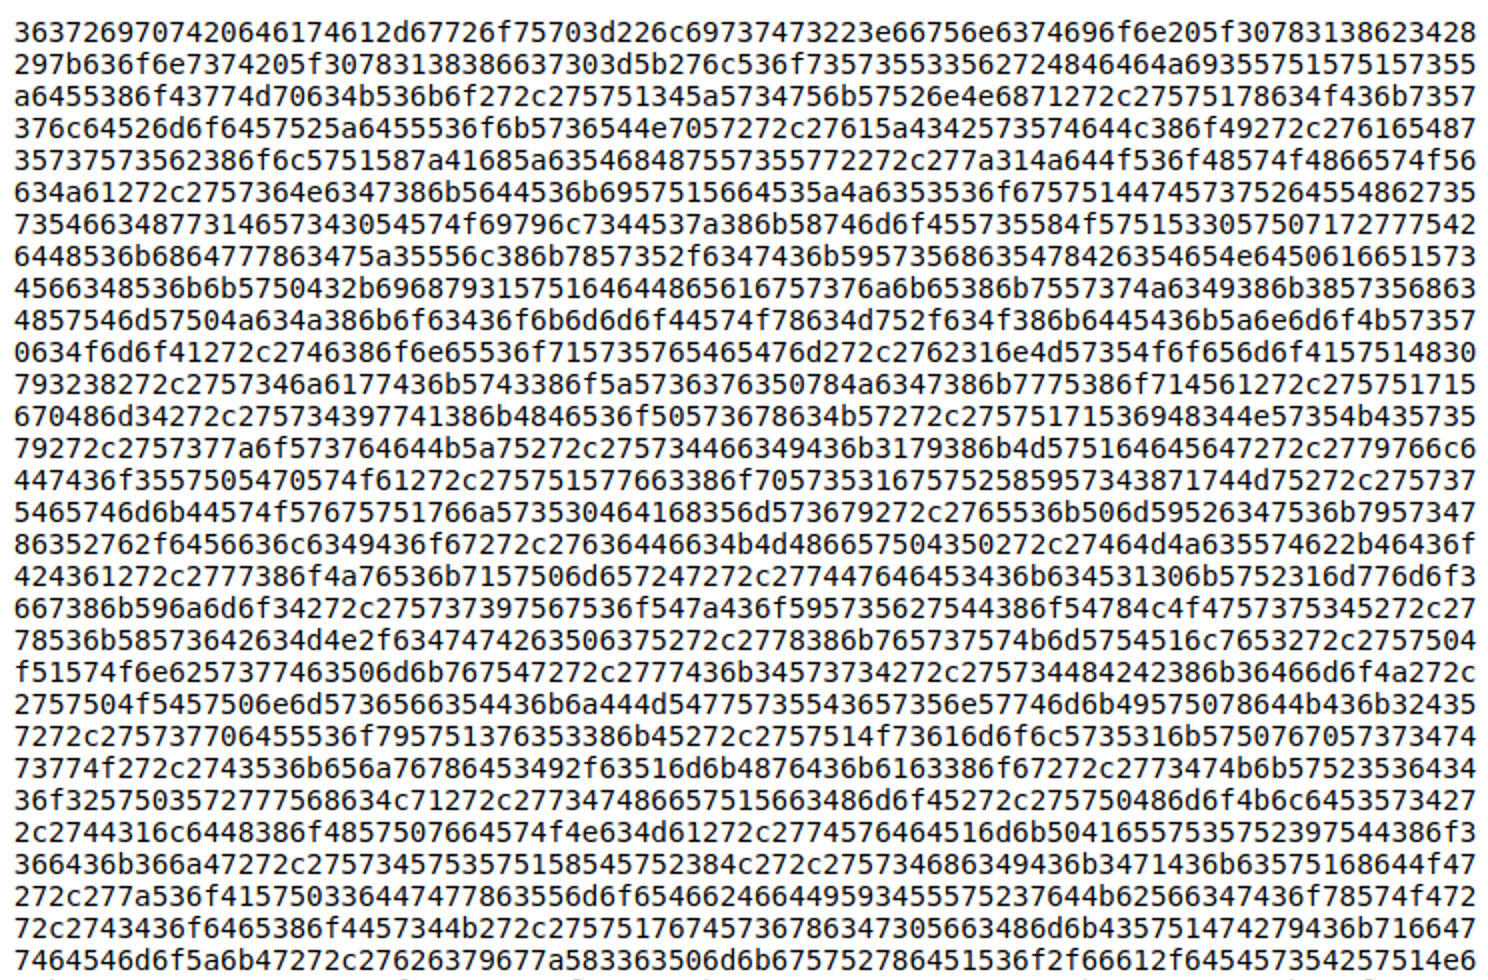 The _inc.tmp file containing 51Kb-long sequence of digits: